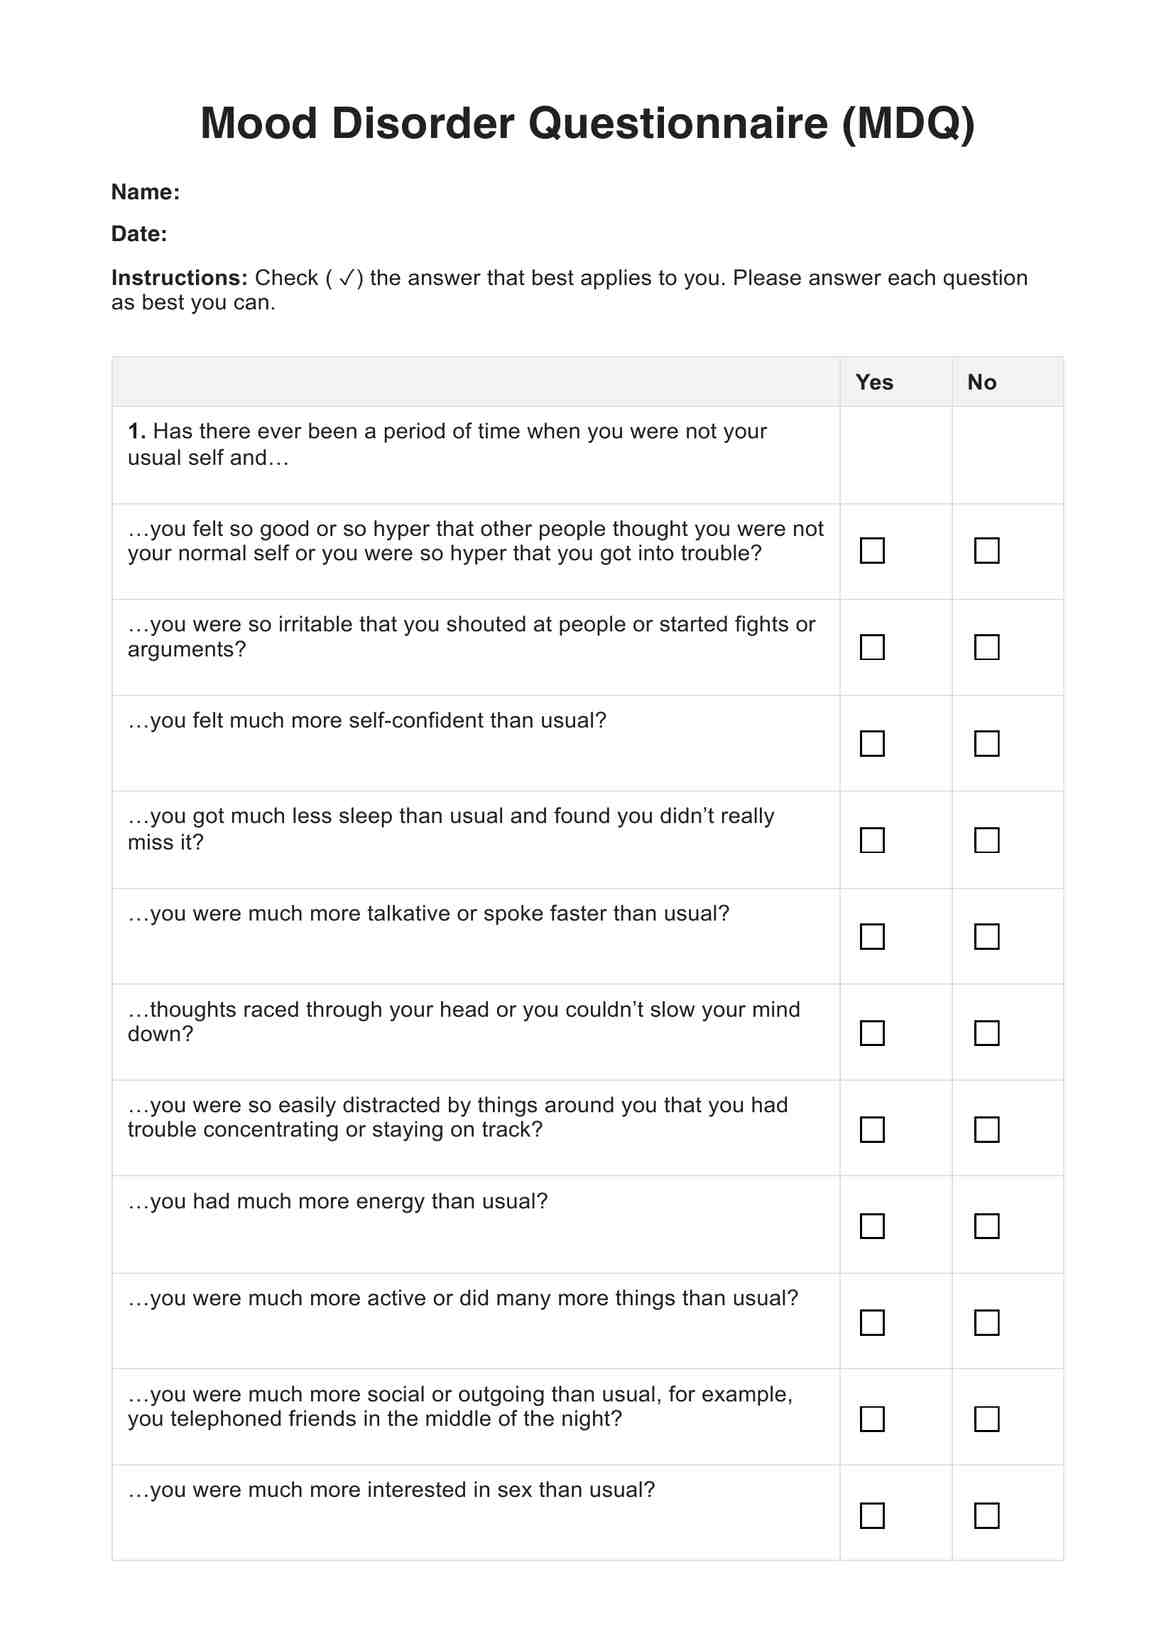 Mood Disorder Questionnaire PDF Example